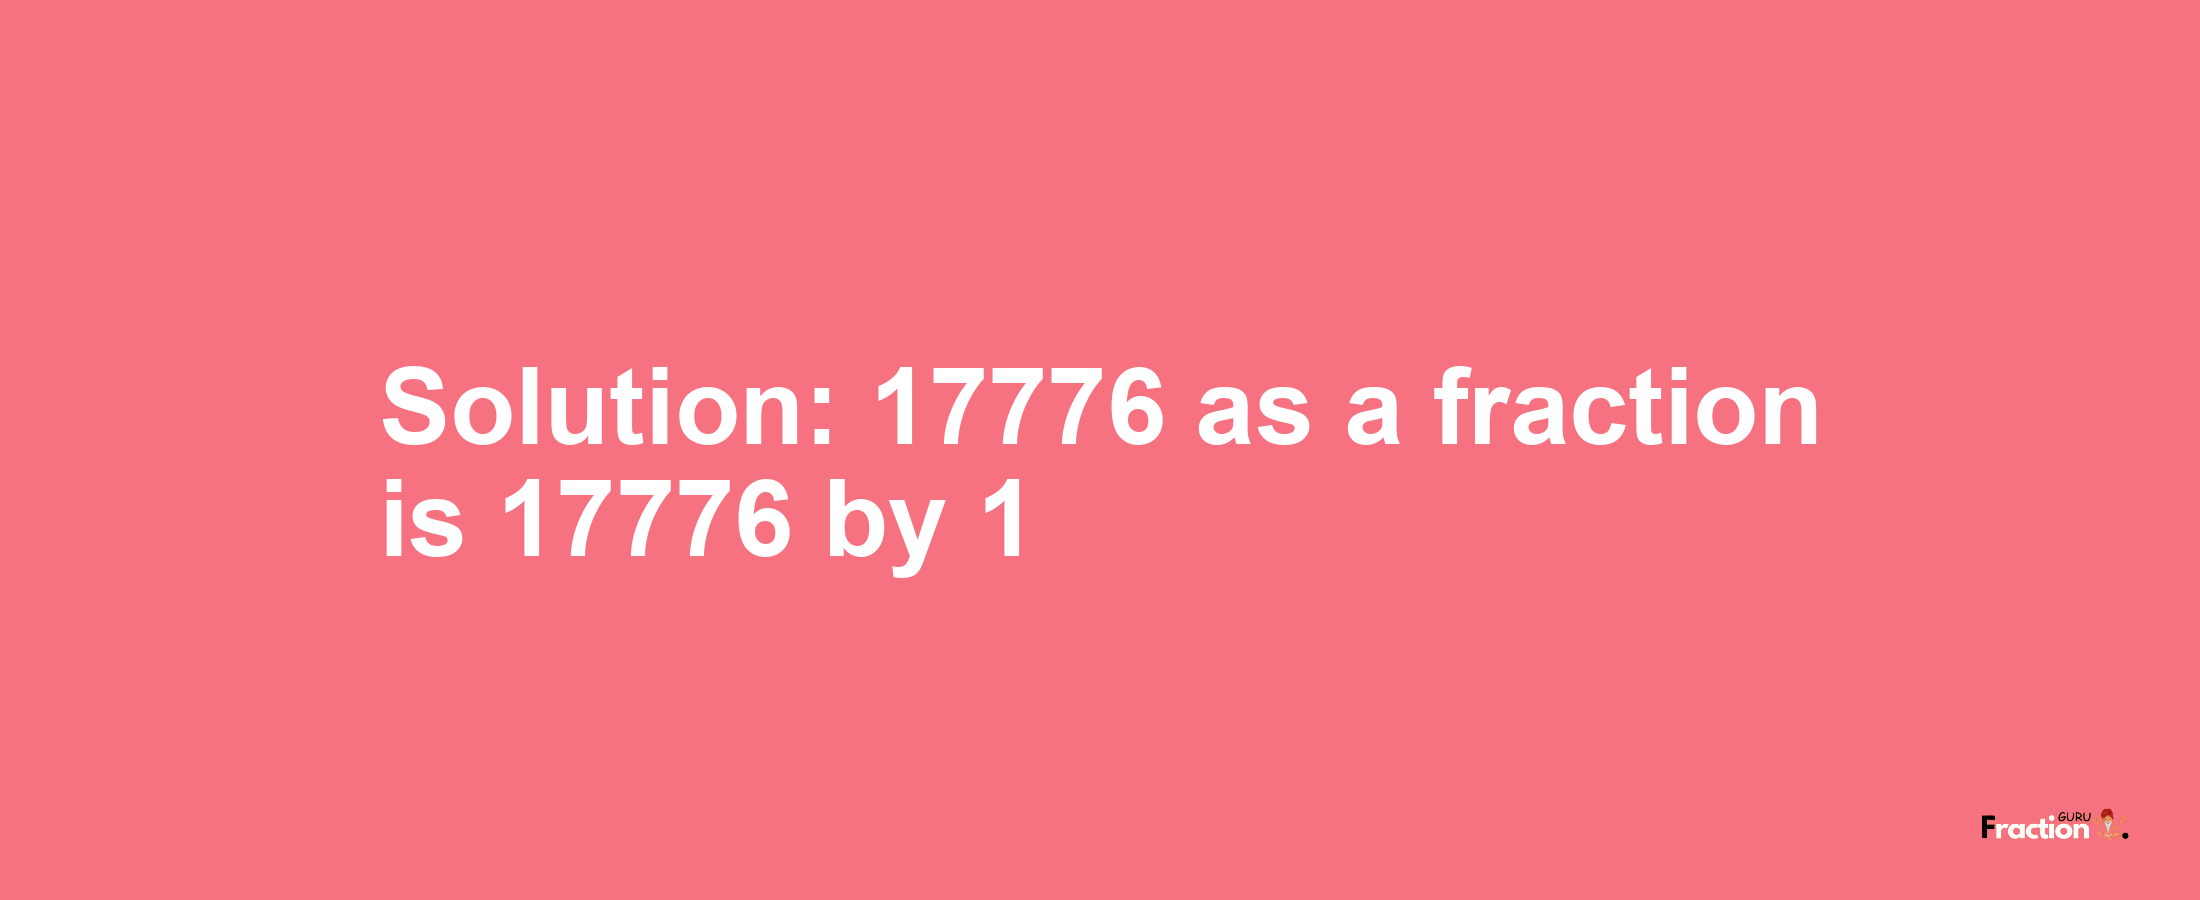 Solution:17776 as a fraction is 17776/1